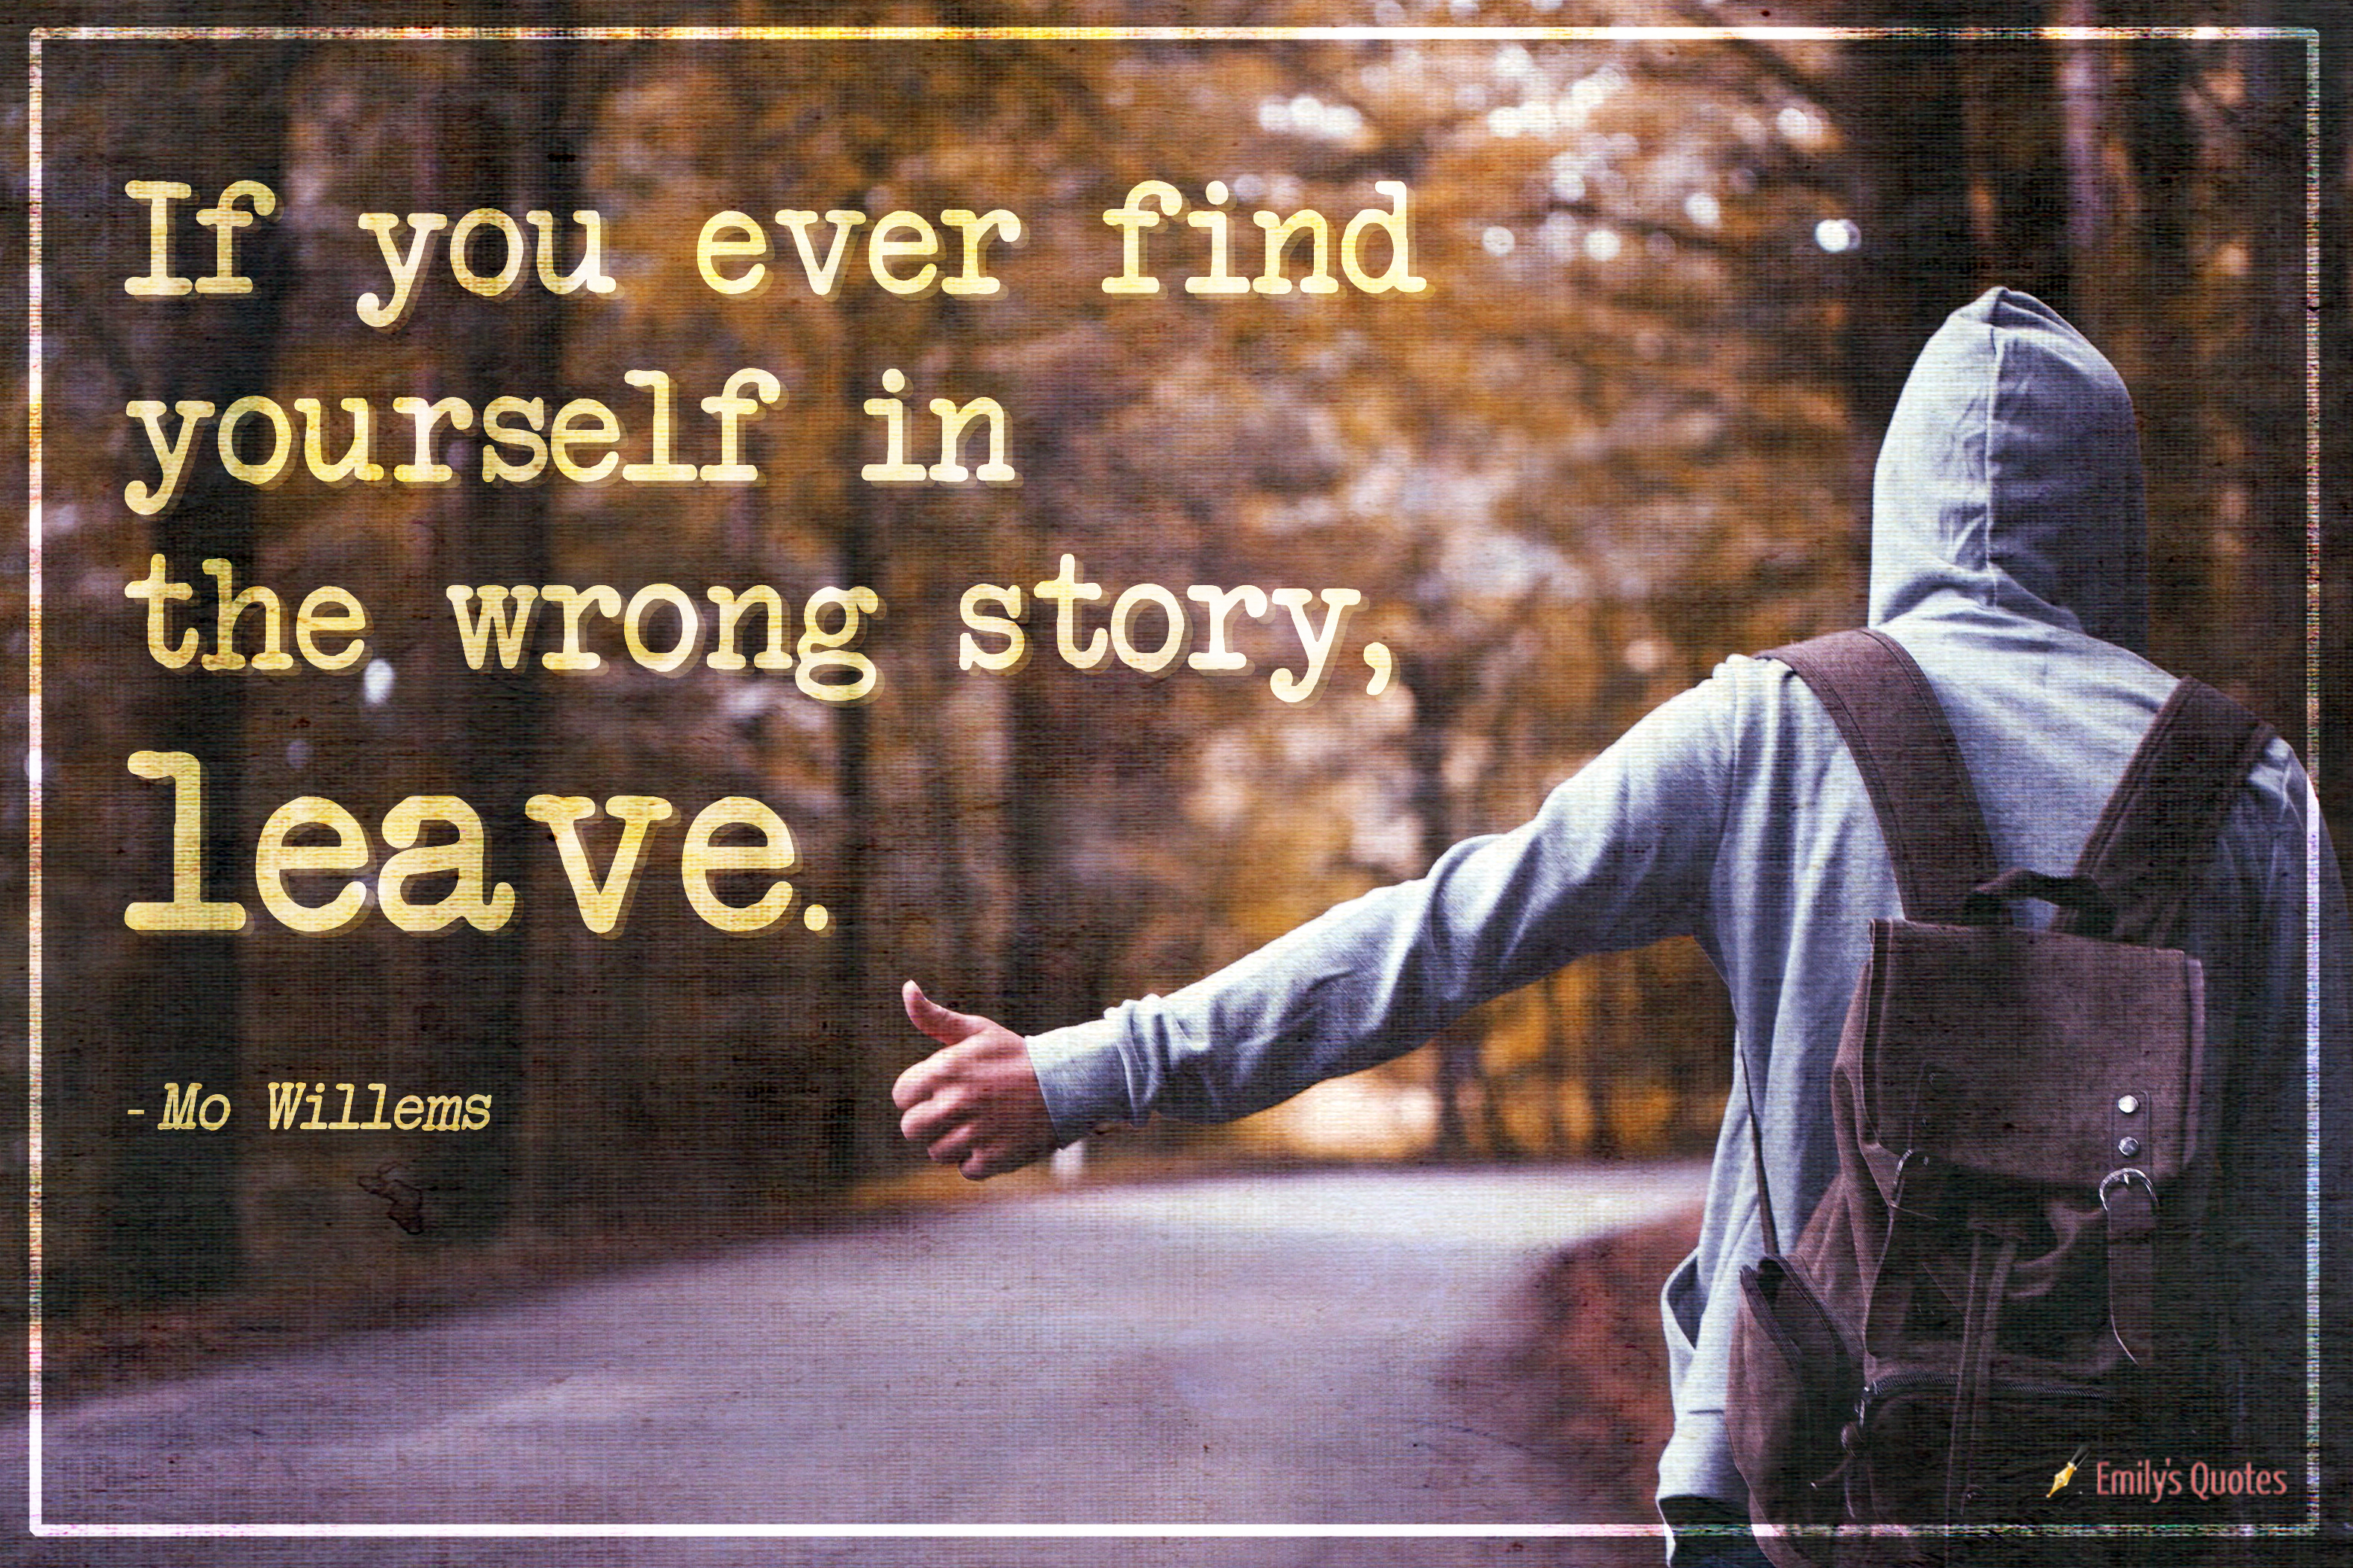 If you ever find yourself in the wrong story, leave